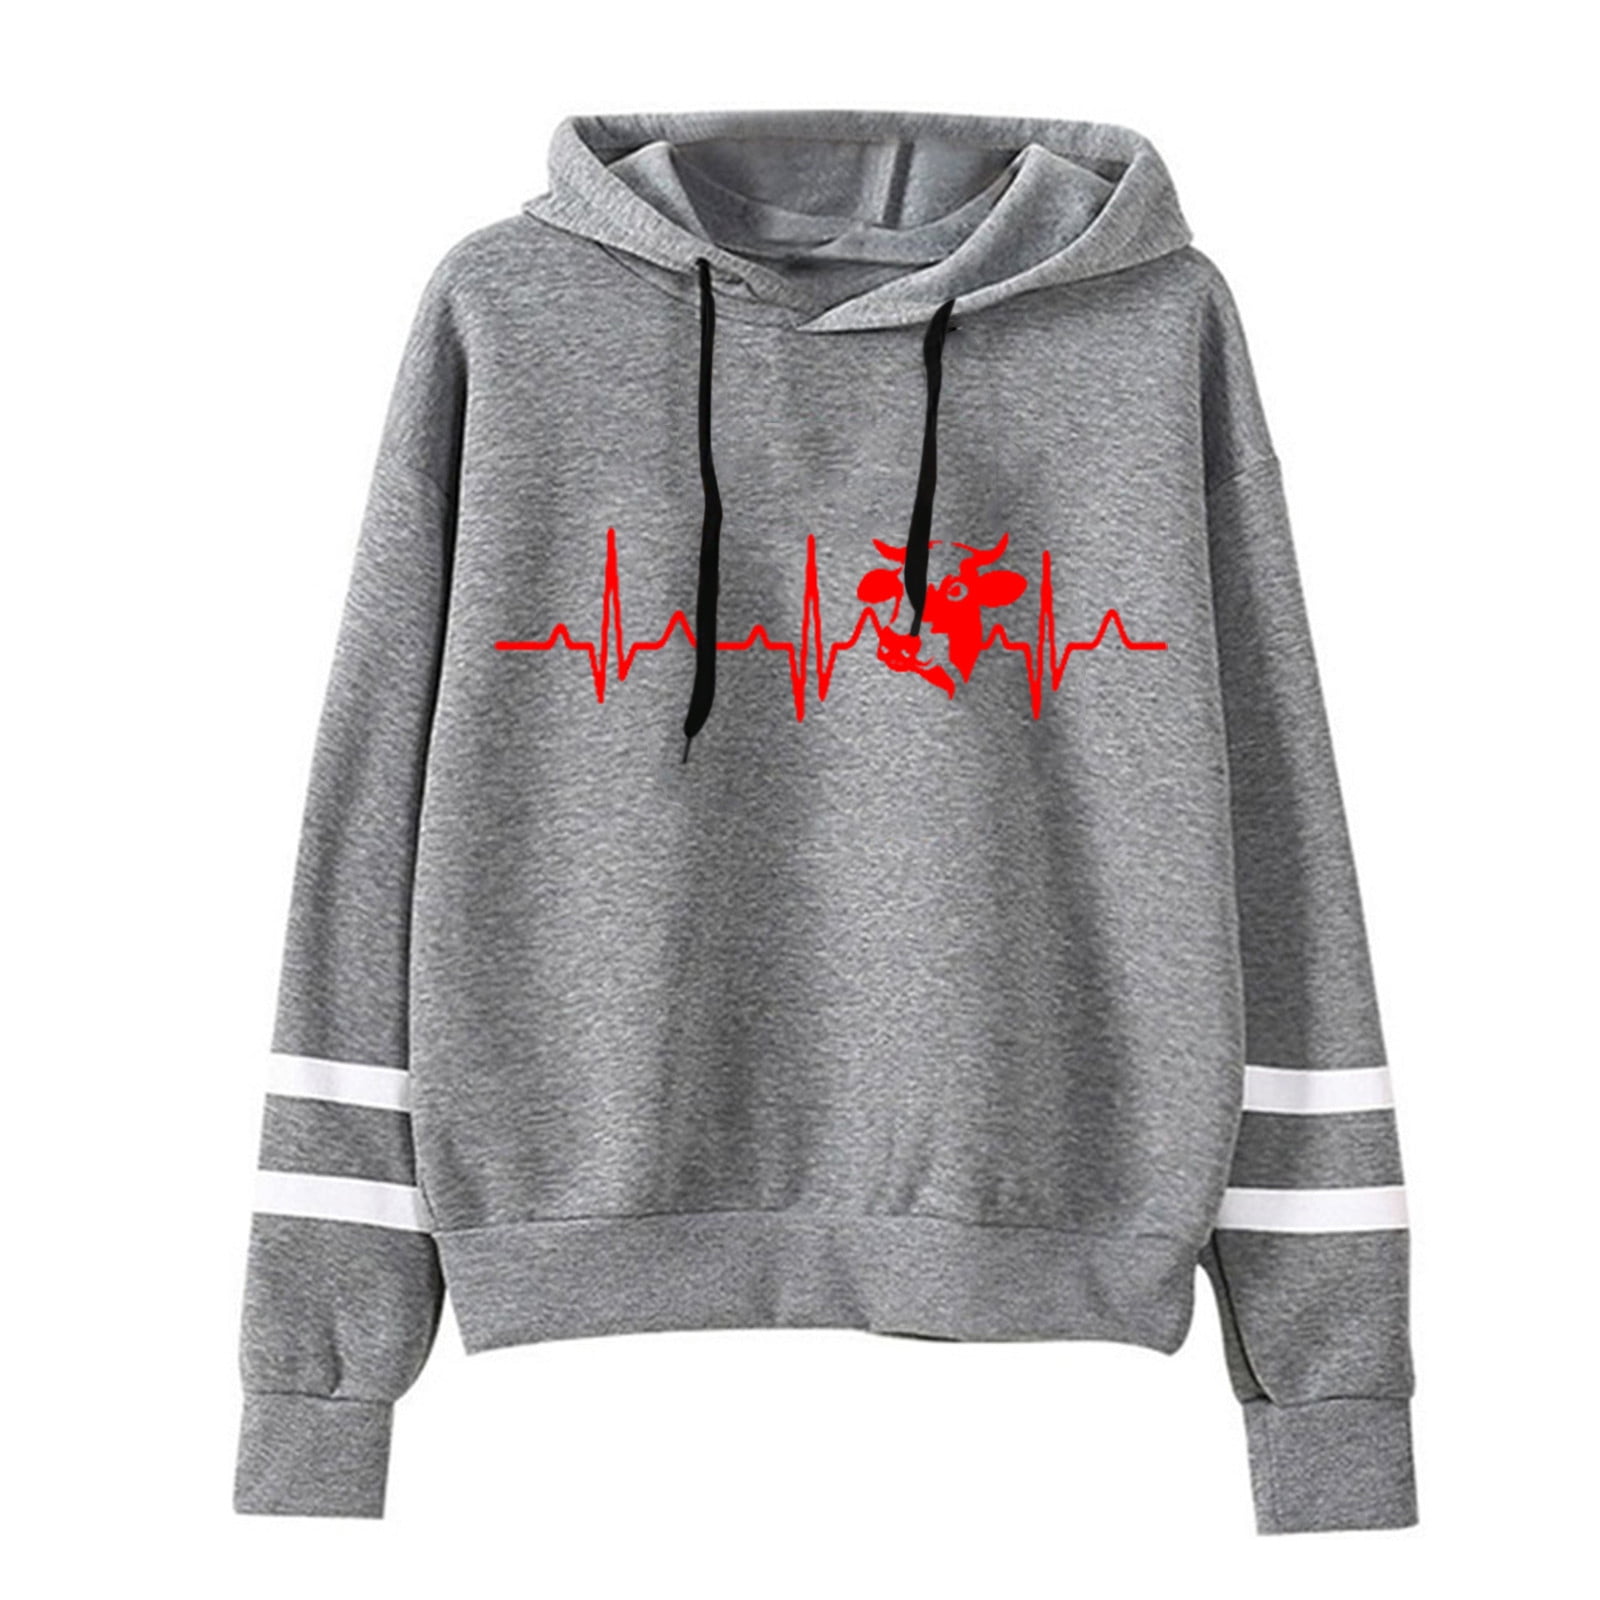 EZBELLE Womens Hoodie Casual Graphic Long Sleeve Shirts Hooded Sweatshirt Pullover Top 